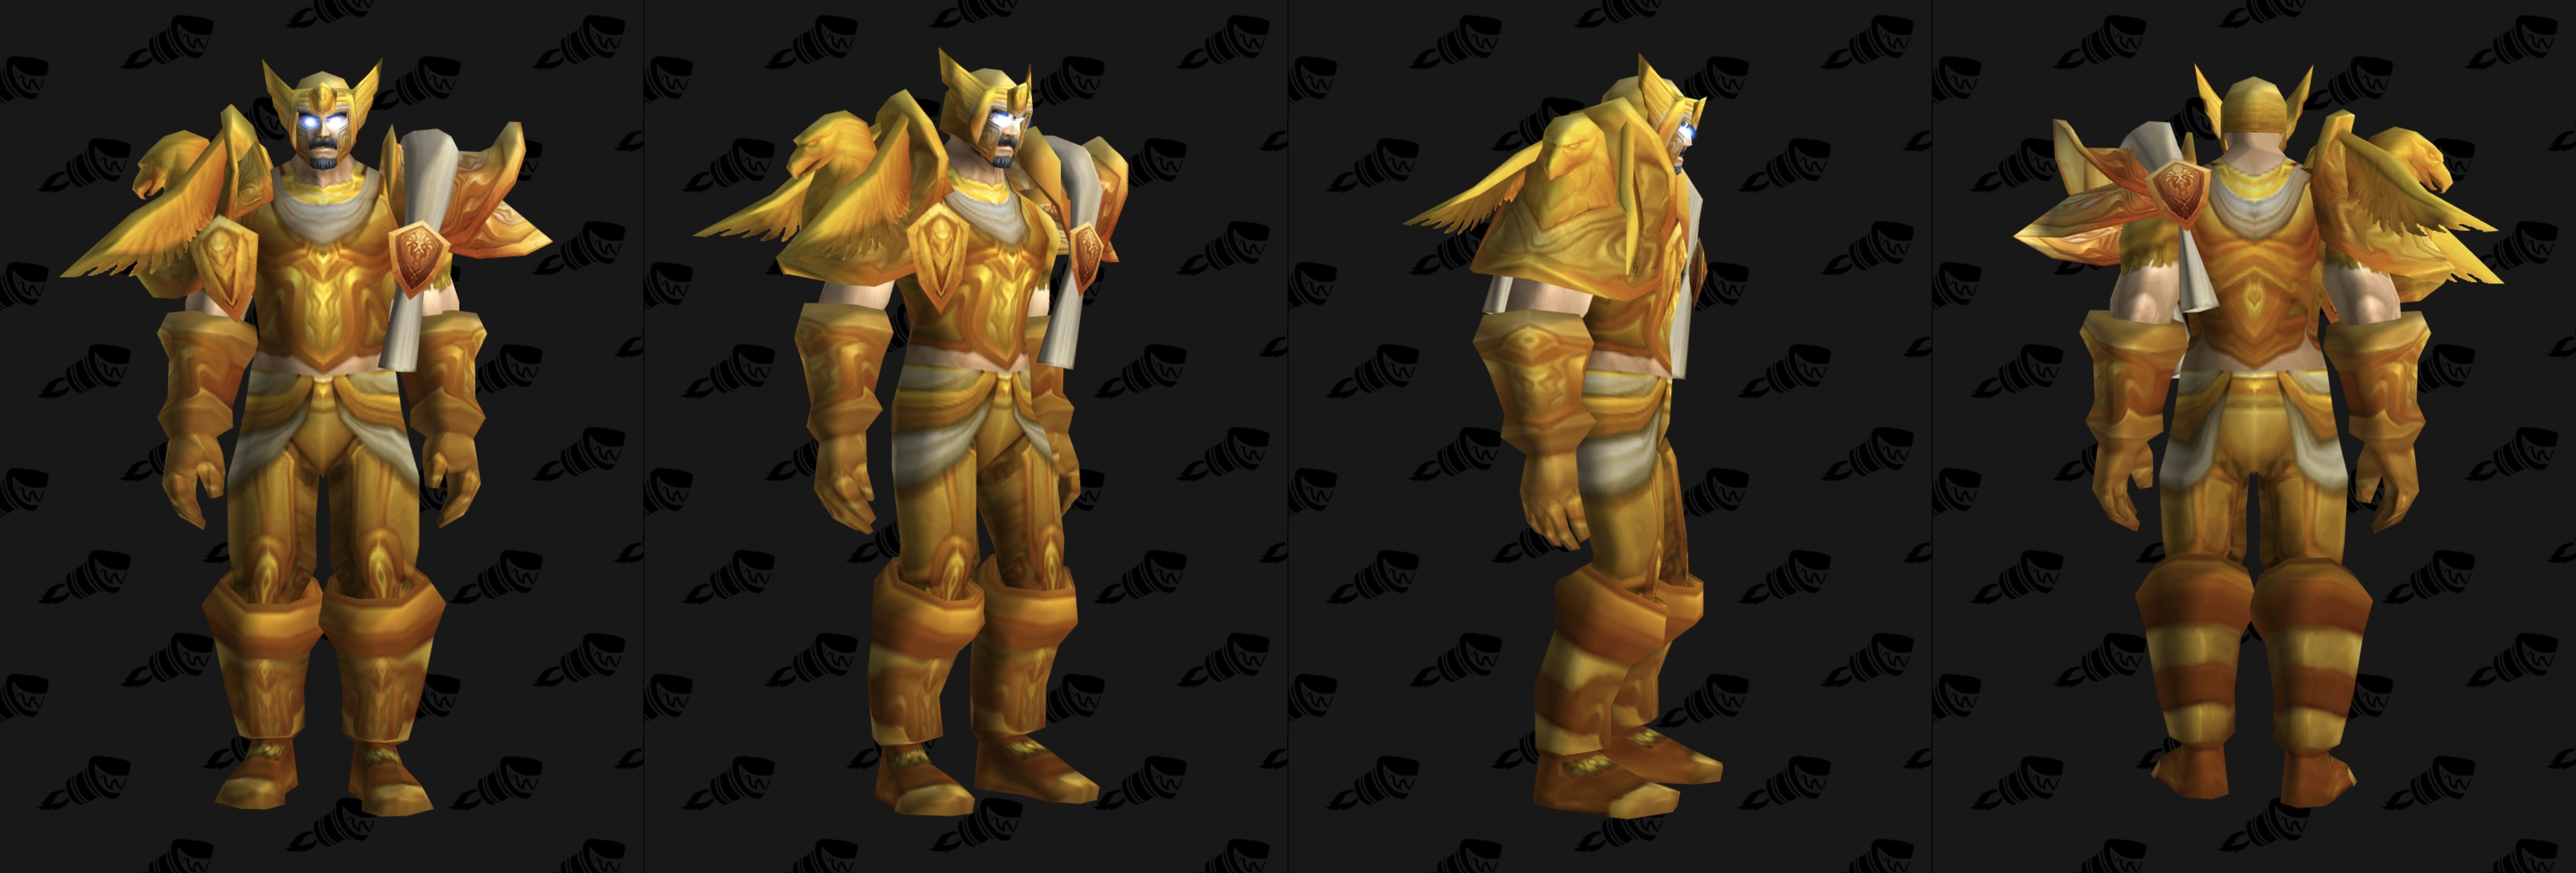 PvP Gear Honor Sets Overview - Classic Season of Mastery - - Wowhead